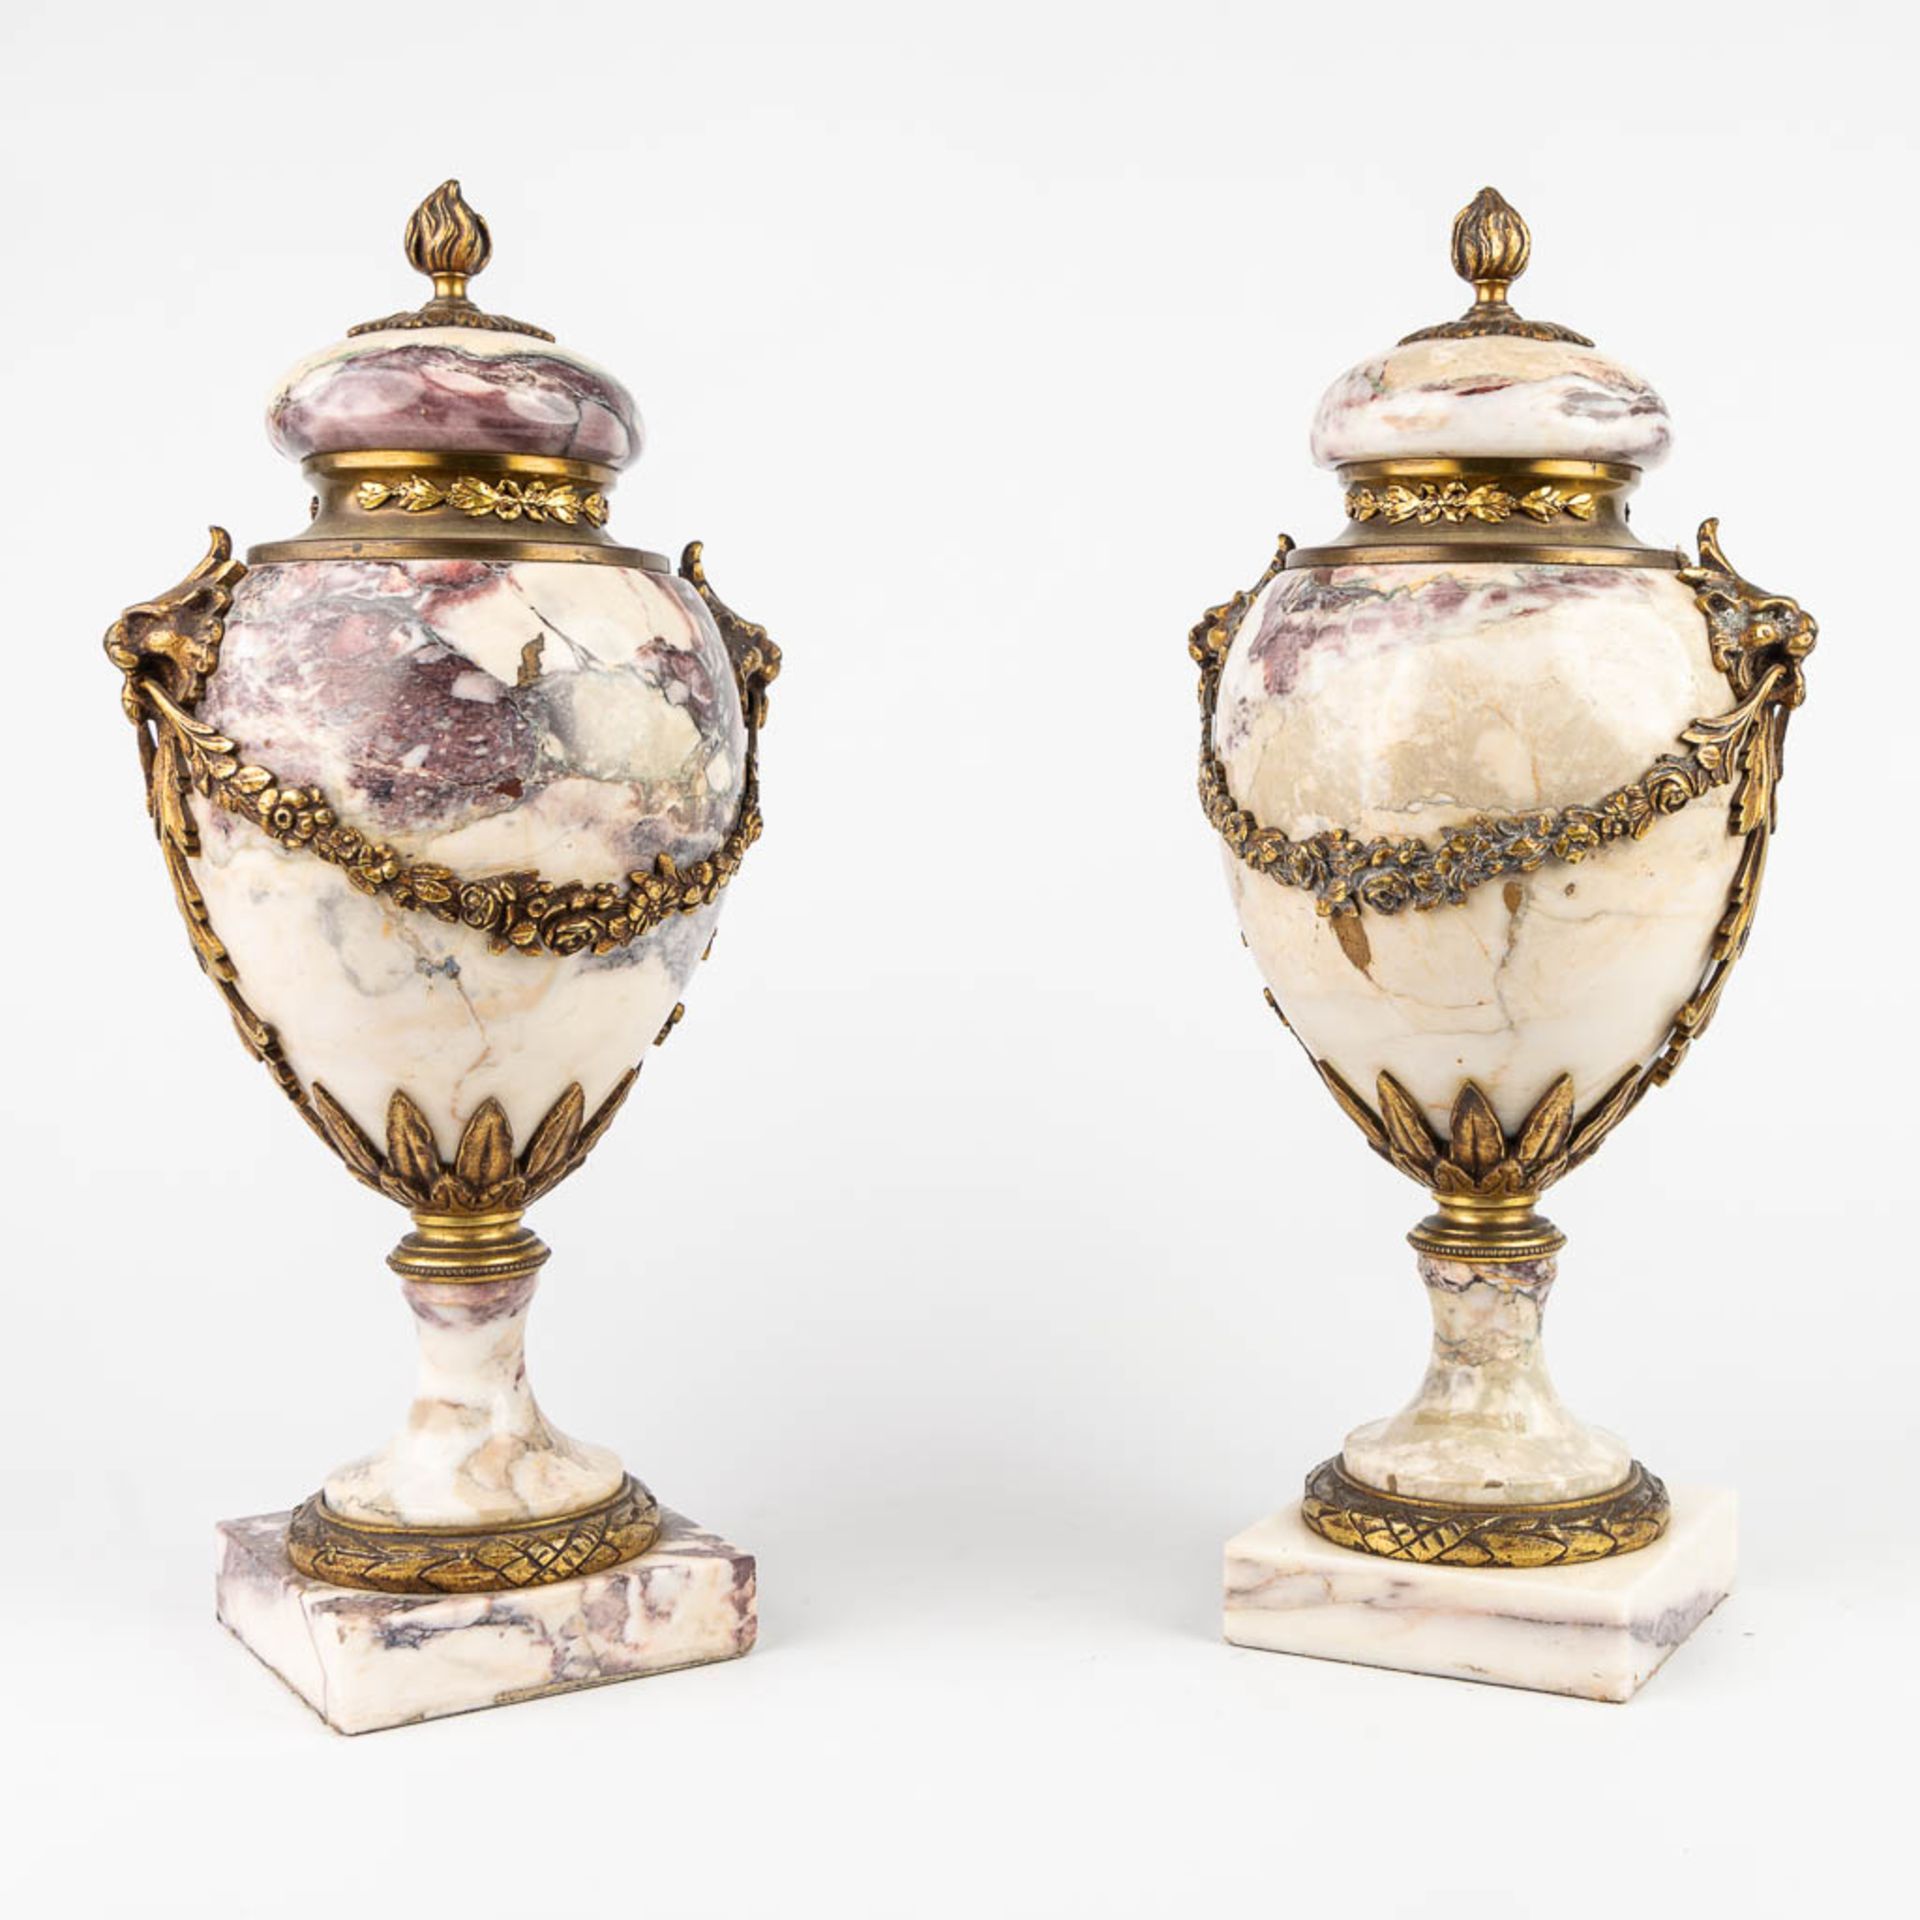 A pair of cassolettes made of marble and mounted with bronze. (H:40cm) - Image 6 of 15